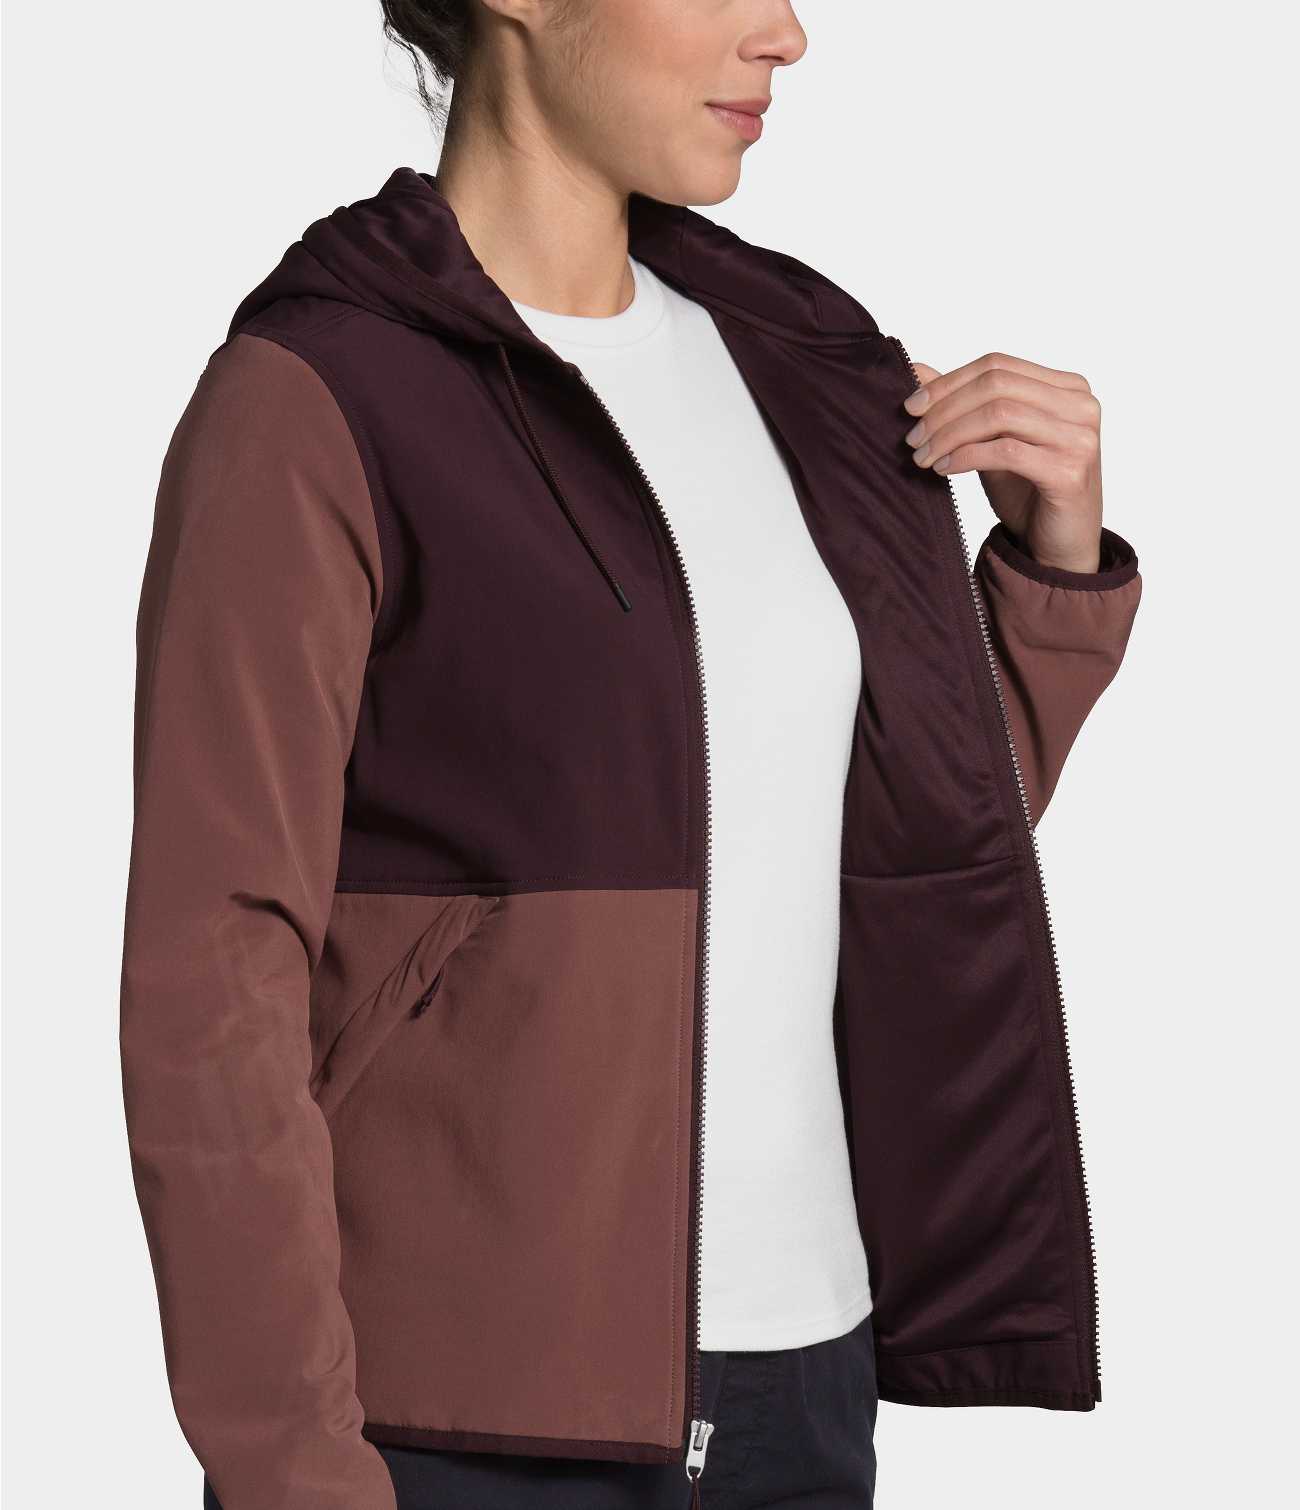 WOMEN'S MOUNTAIN SWEATSHIRT HOODIE 3.0 | The North Face | The